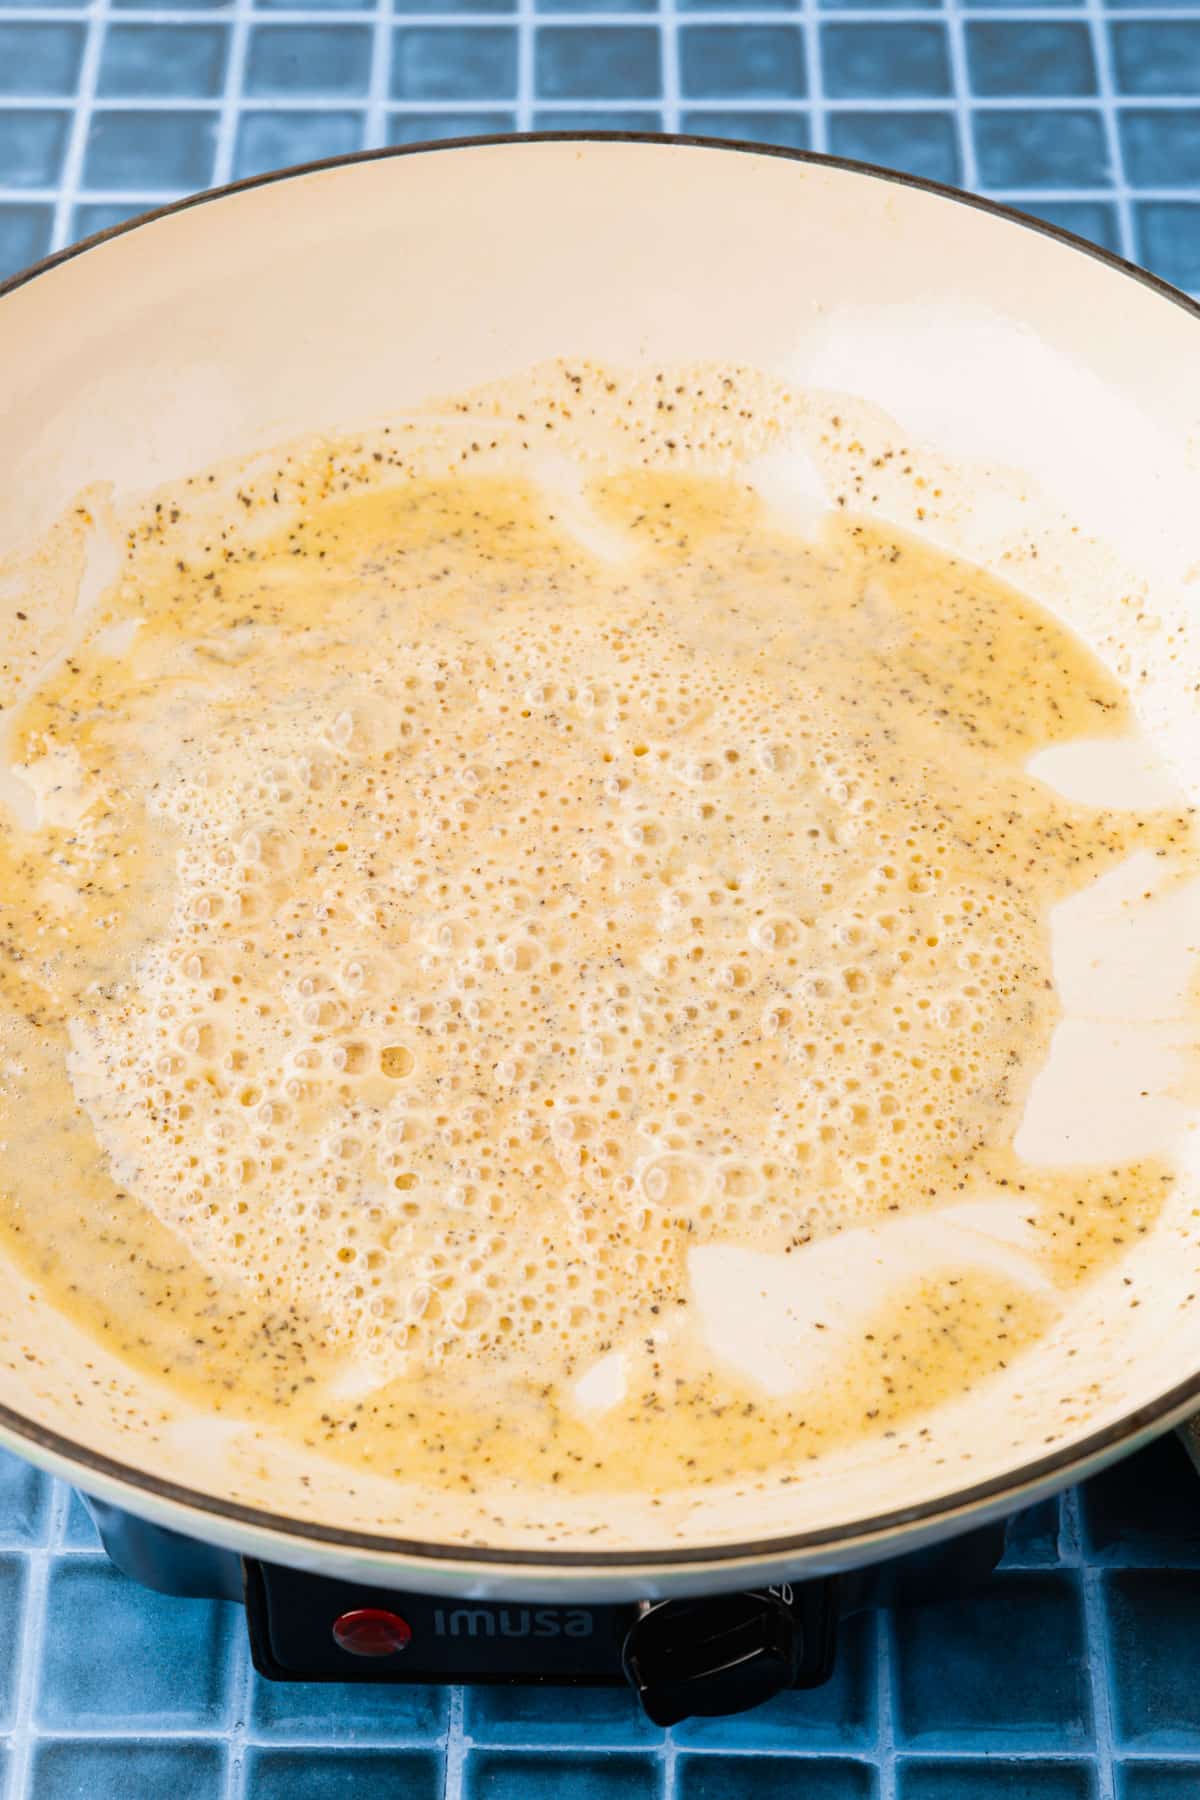 A gluten free roux in a white pan that is bubbling up and golden brown.